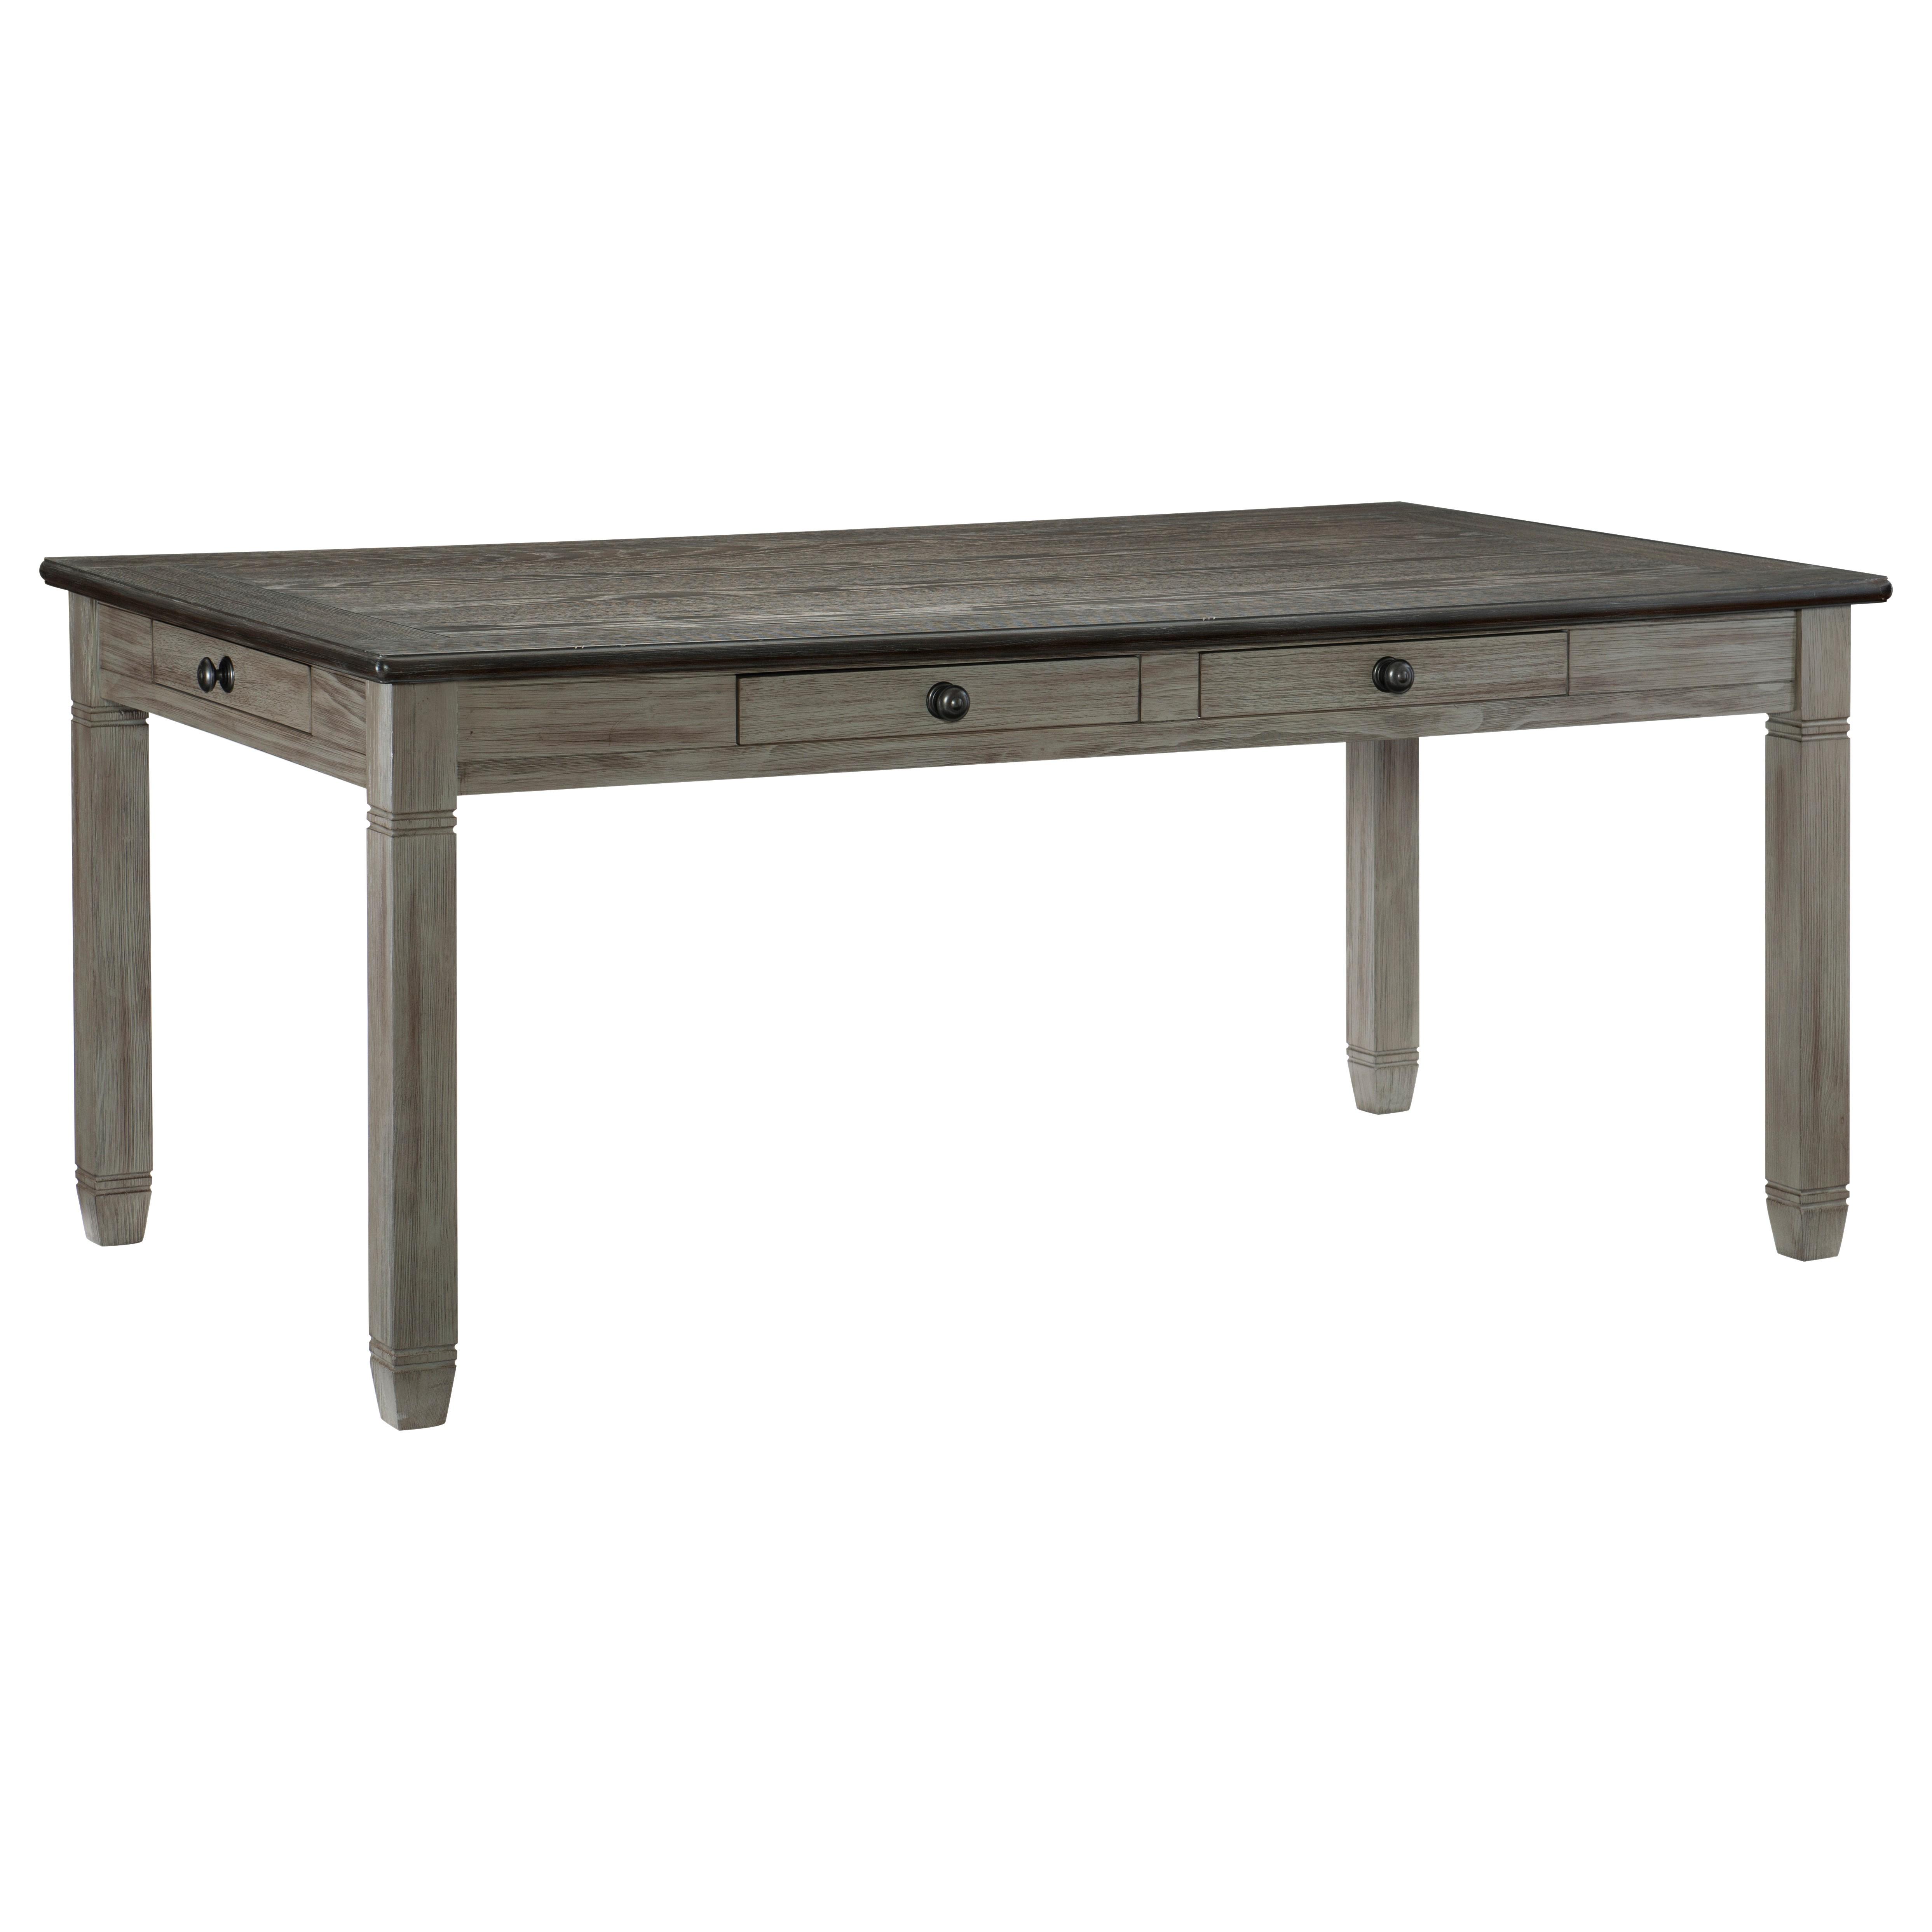 Casual Dining Table 5627GY-72 Granby 5627GY-72 in Gray 